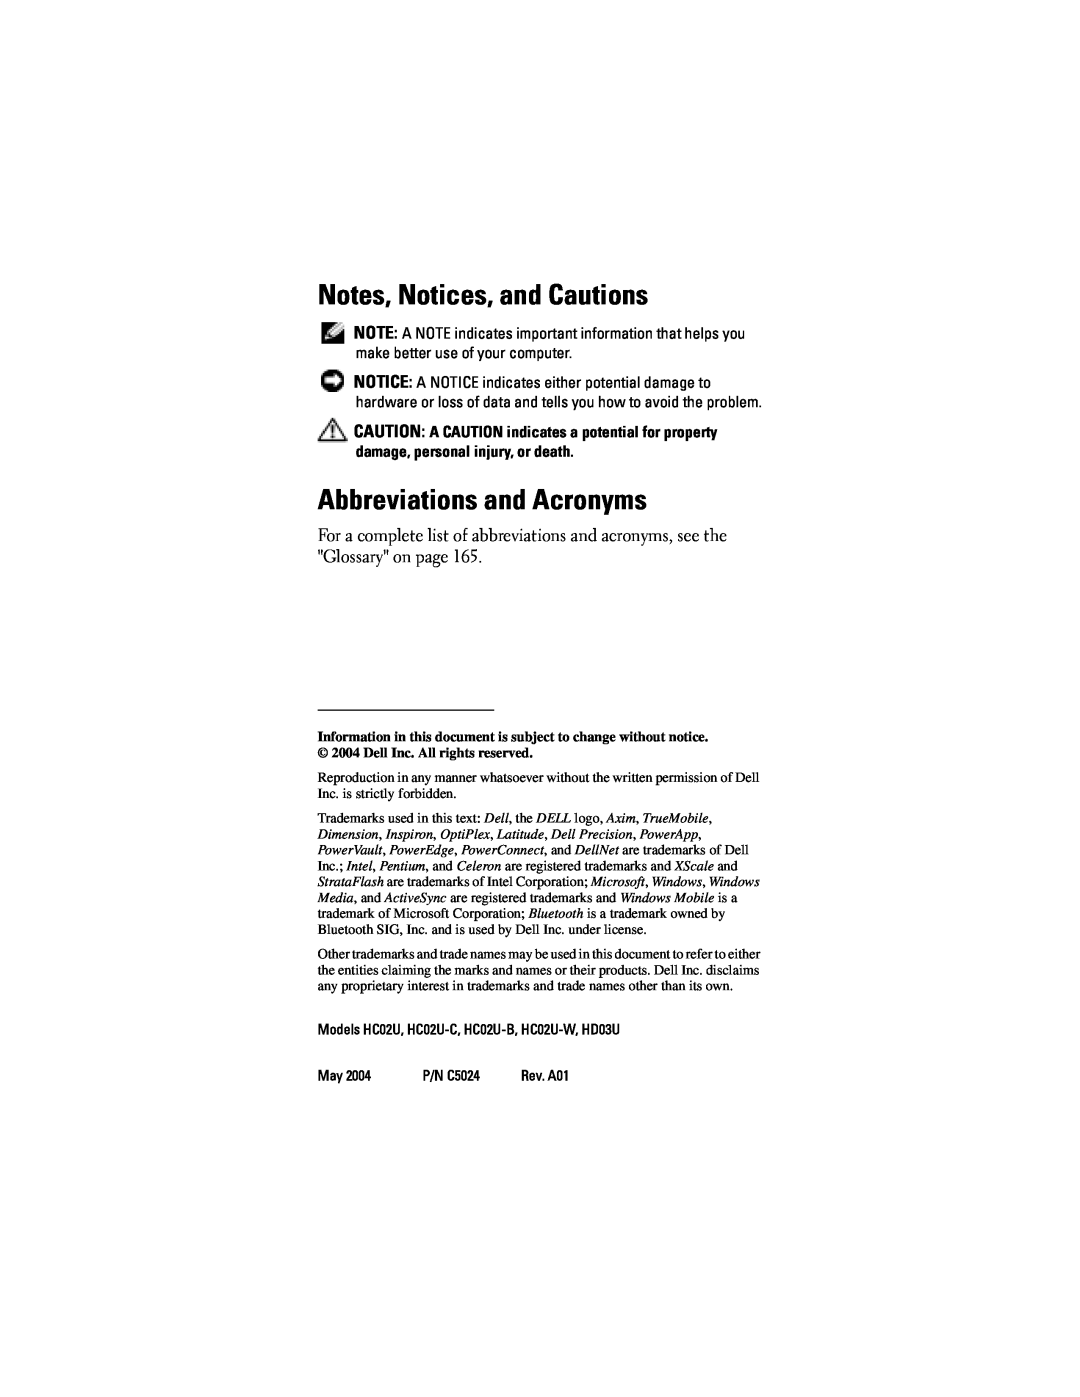 Dell Notes, Notices, and Cautions, Abbreviations and Acronyms, Models HC02U, HC02U-C, HC02U-B, HC02U-W, HD03U 